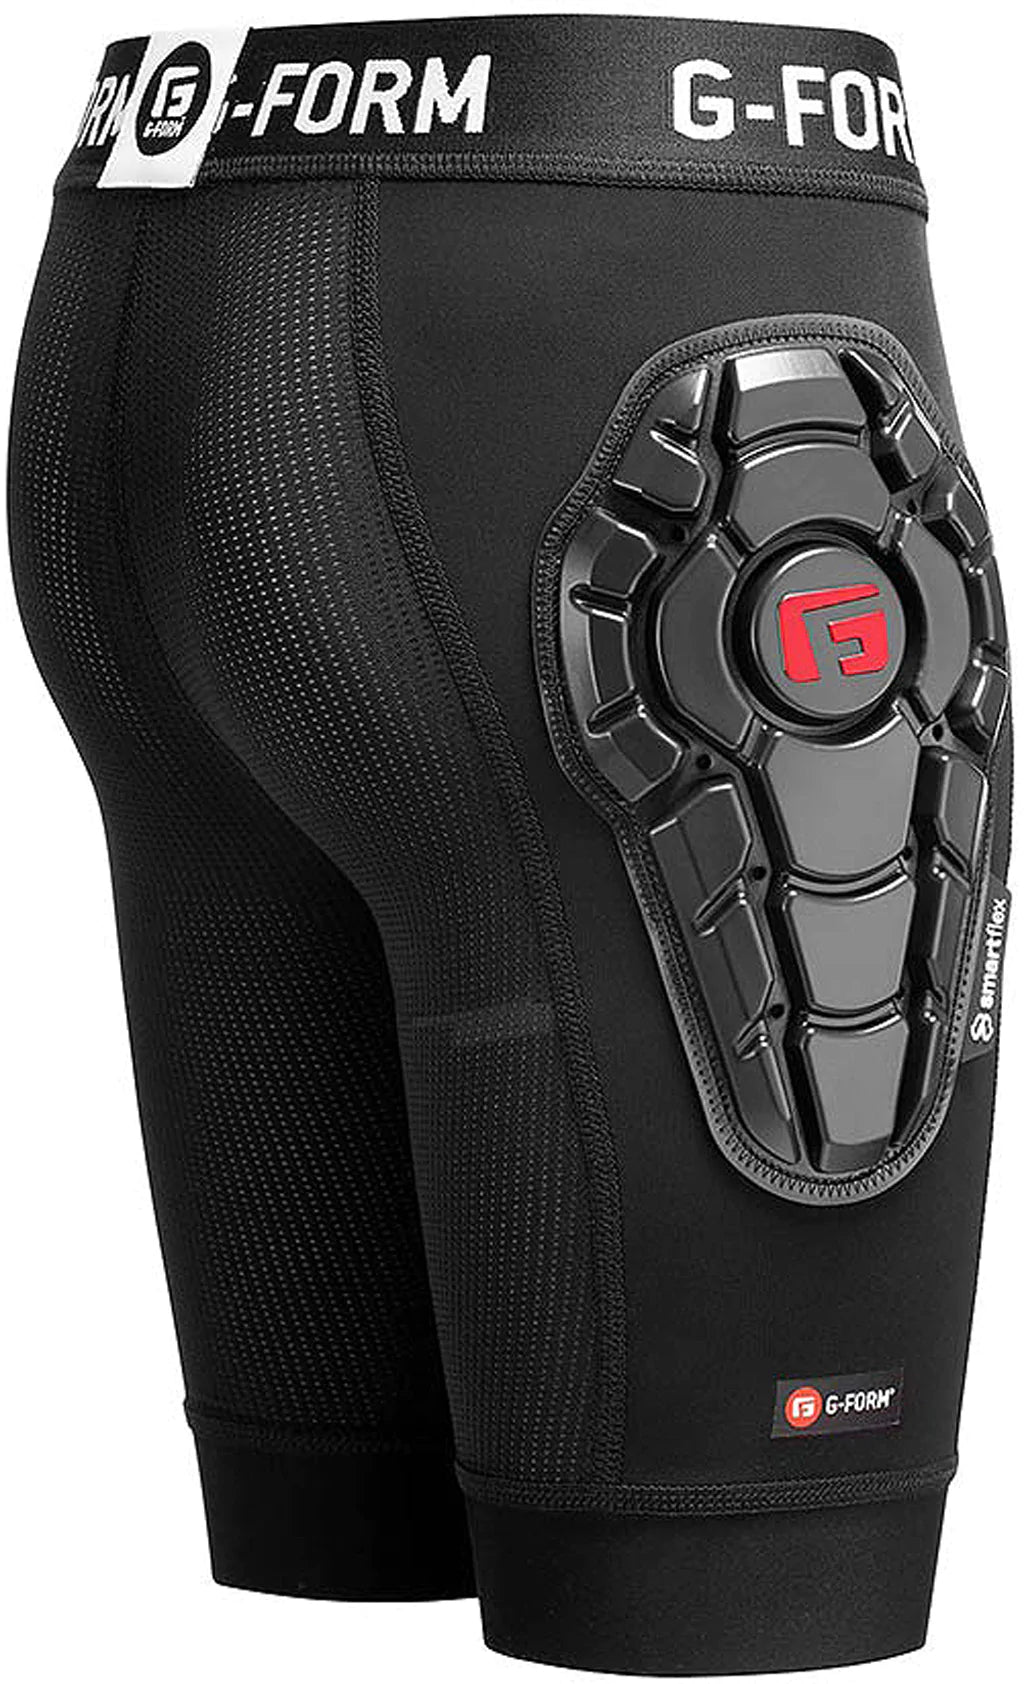 G-Form Youth Pro-X3 Short Liners